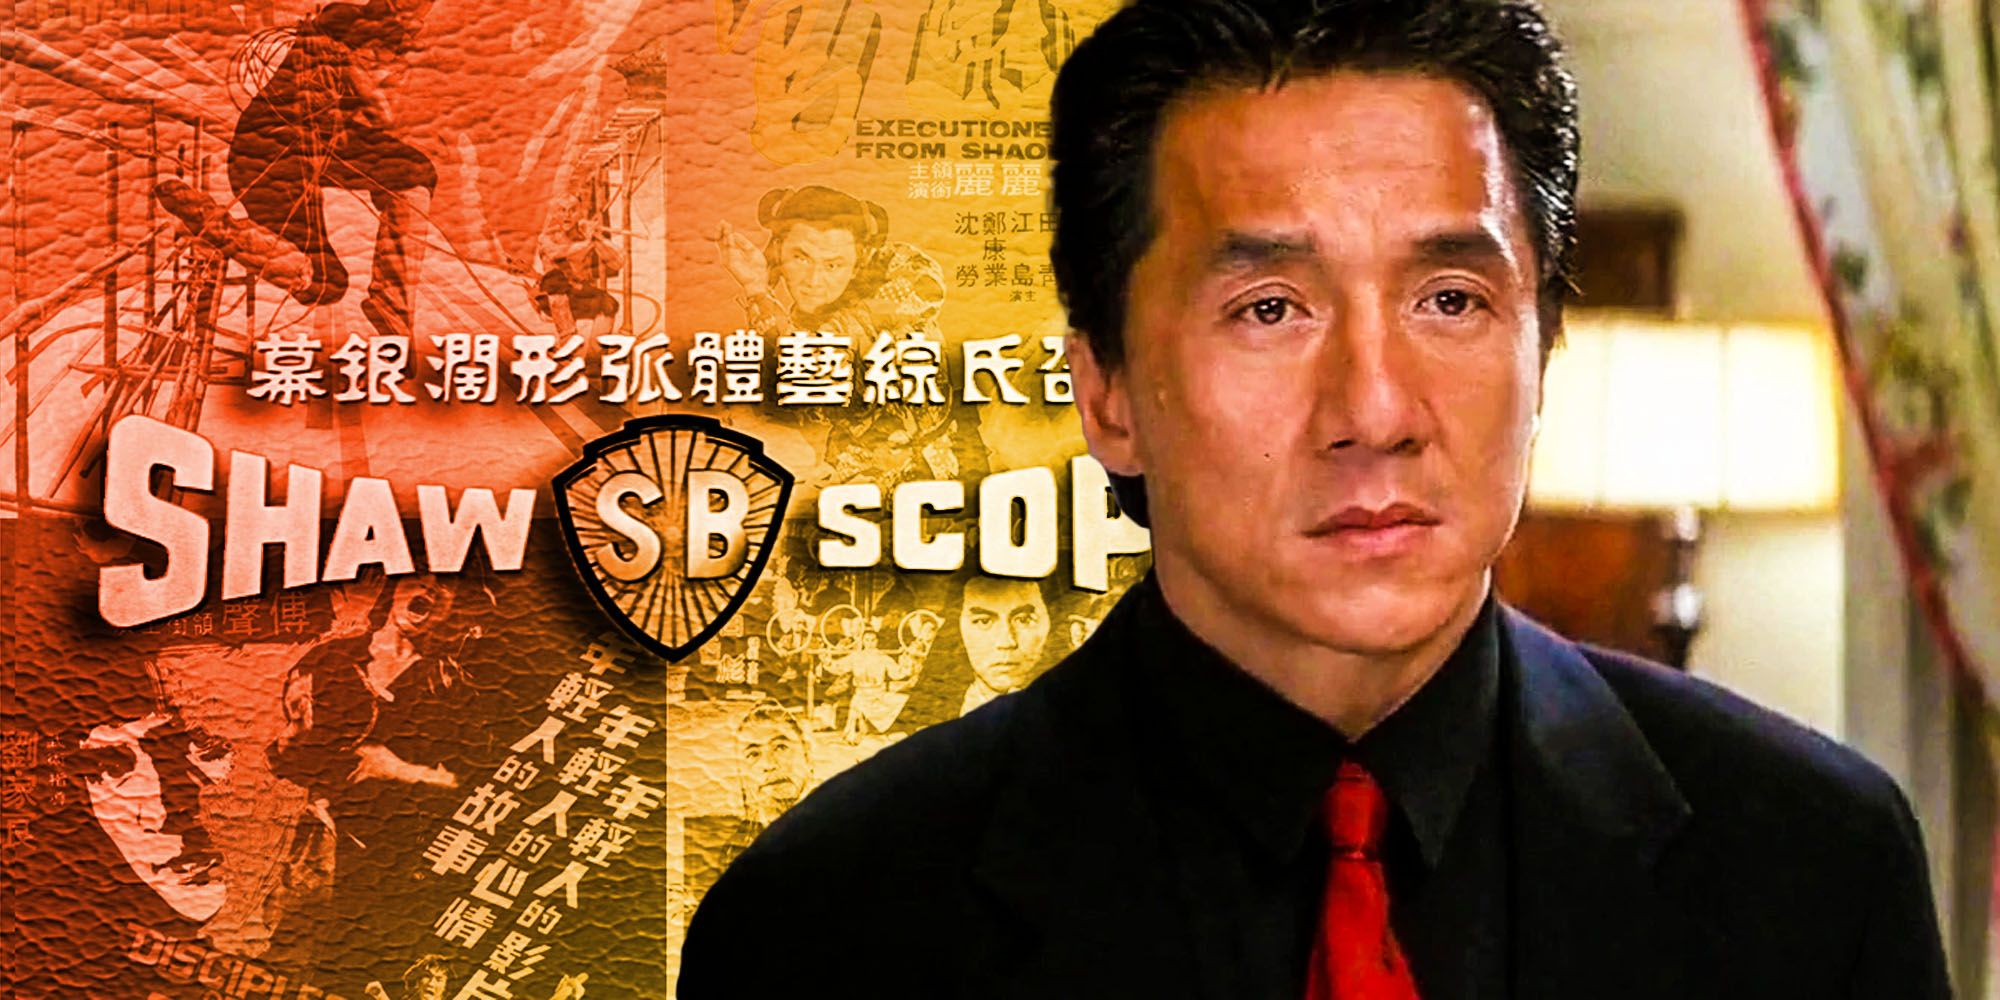 Jackie Chan rush hour Shaw brothers